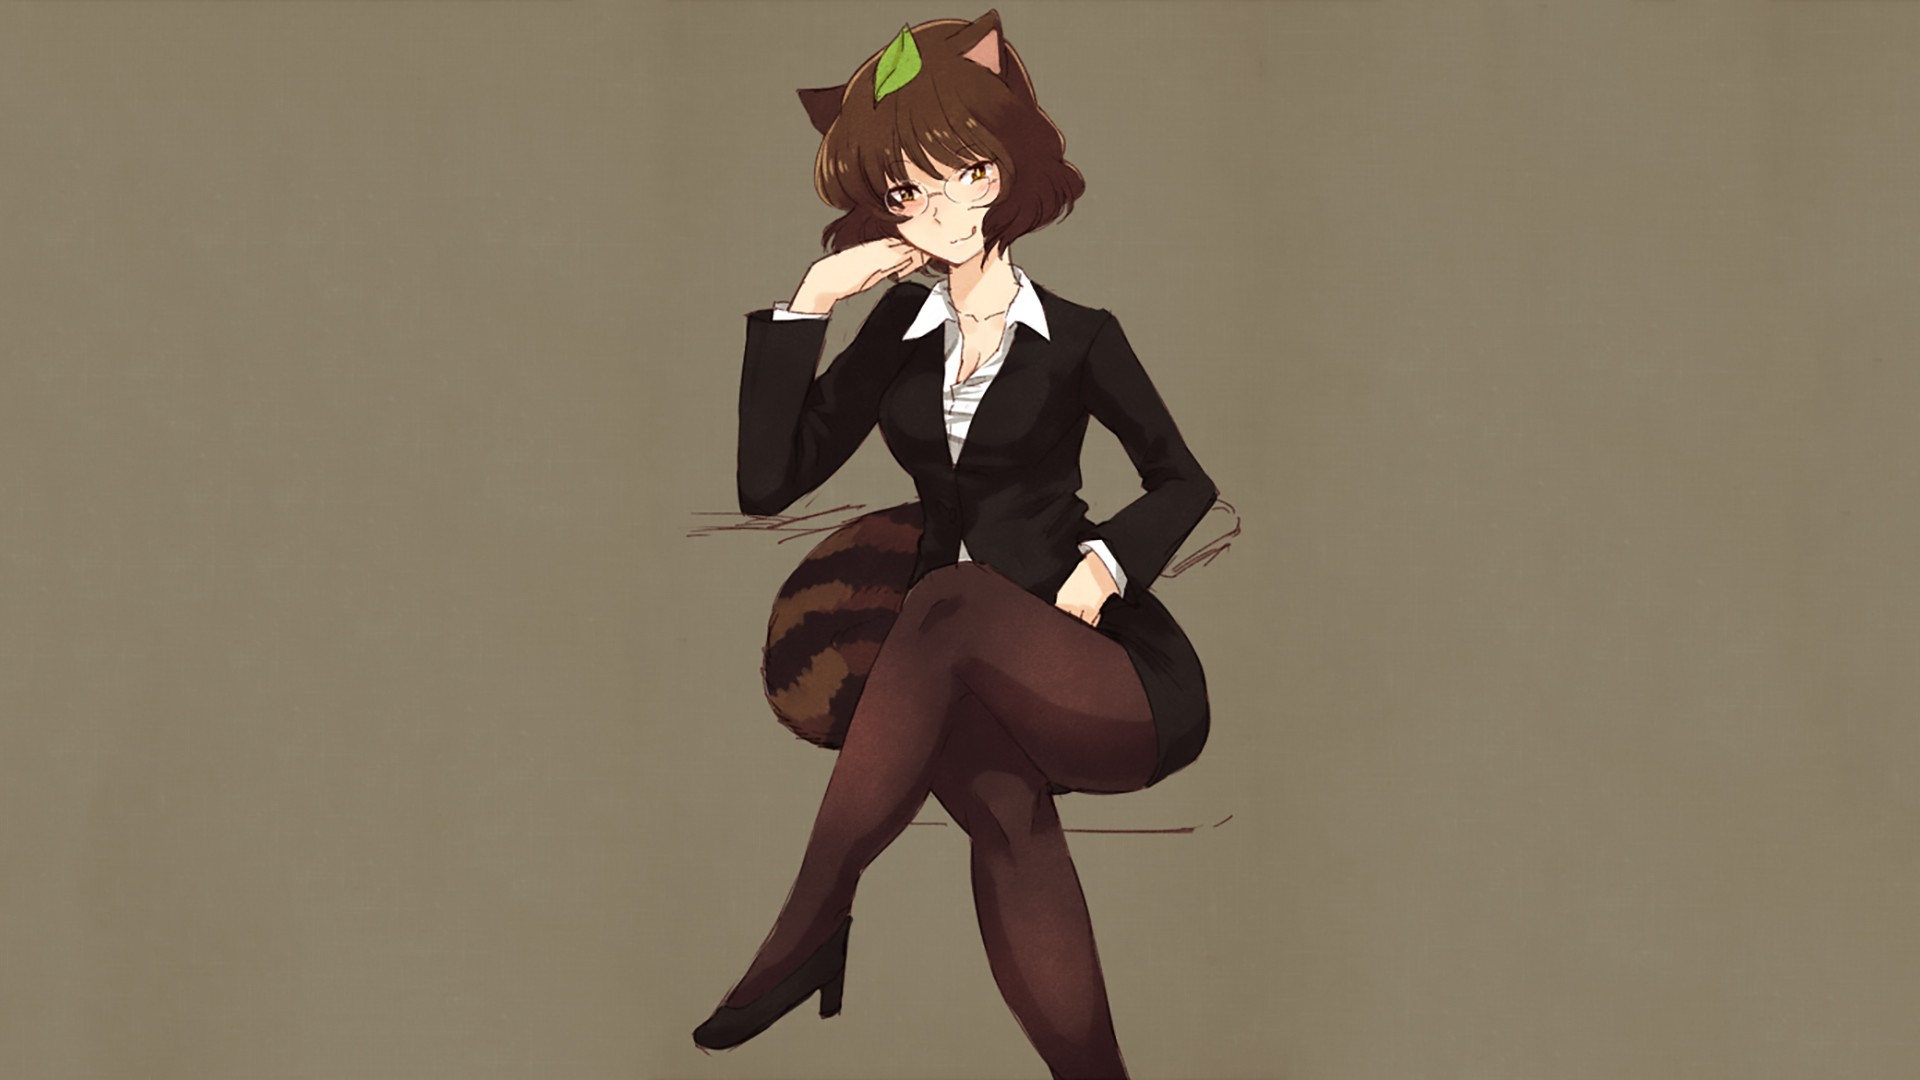 Anime 1920x1080 Futatsuiwa Mamizou Touhou glasses looking at viewer legs legs crossed women with glasses animal ears cat girl simple background anime girls anime